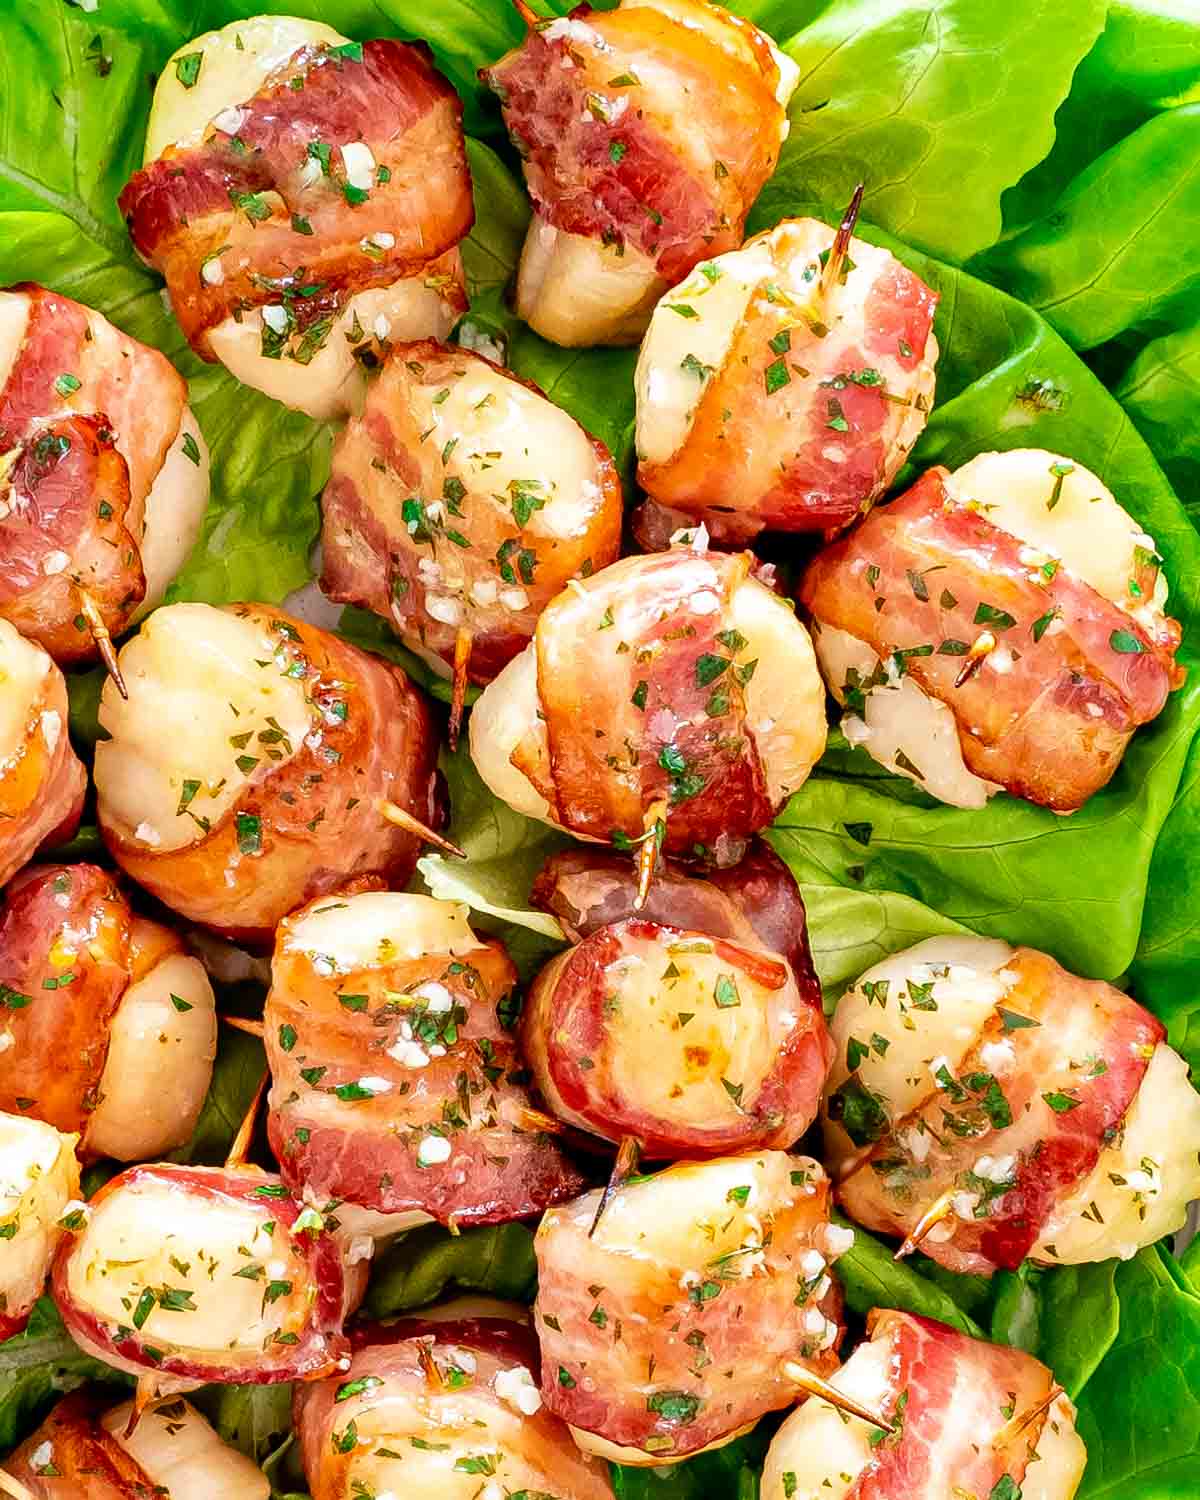 bacon wrapped scallops brushed with garlic butter on a bed of lettuce.